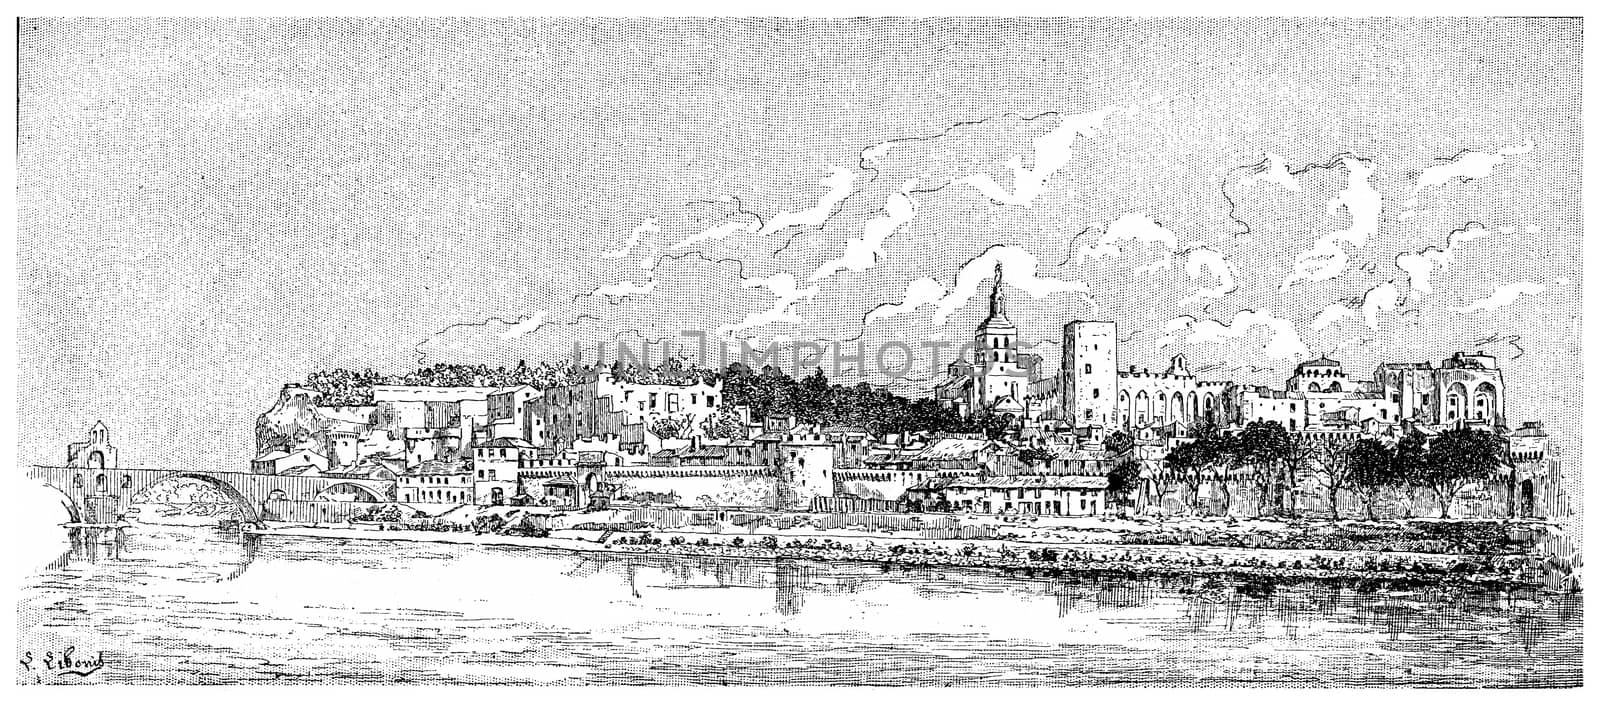 Avignon, vintage engraved illustration. Dictionary of words and things - Larive and Fleury - 1895.
